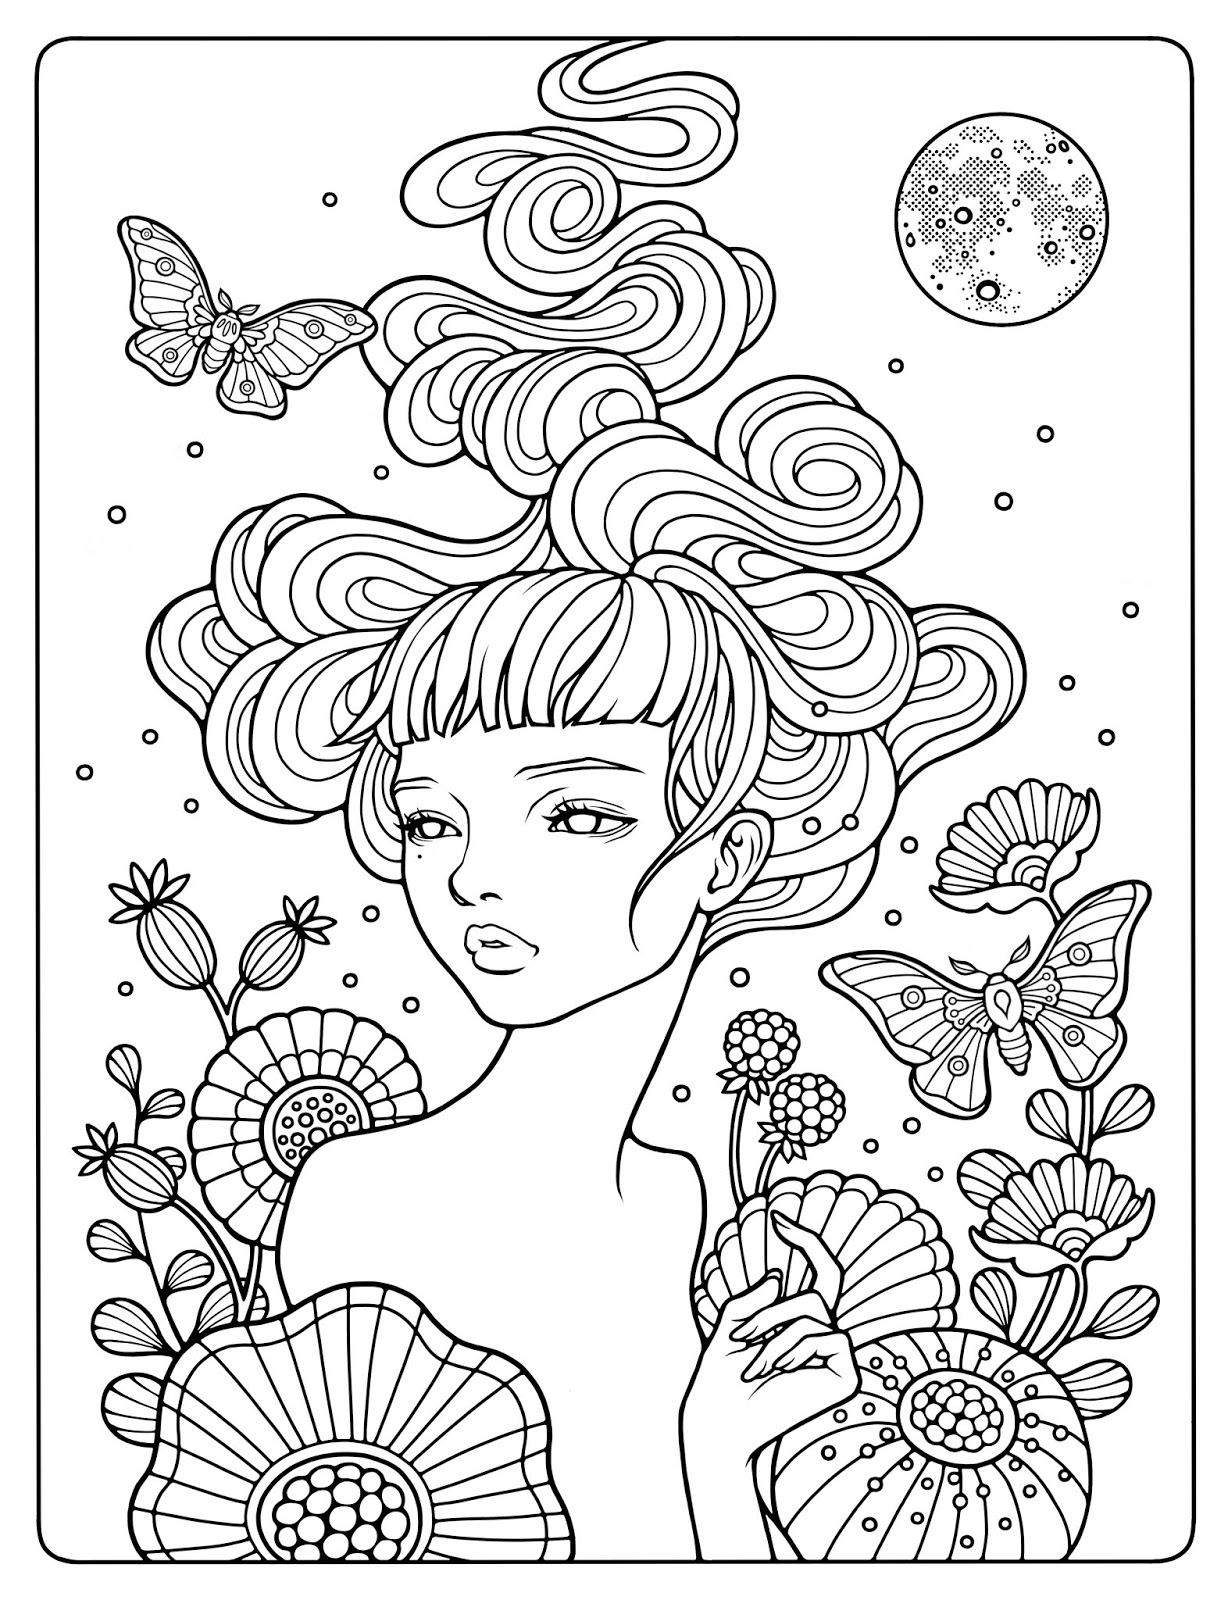 Releases audrey kawasaki coloring pages arrested motion